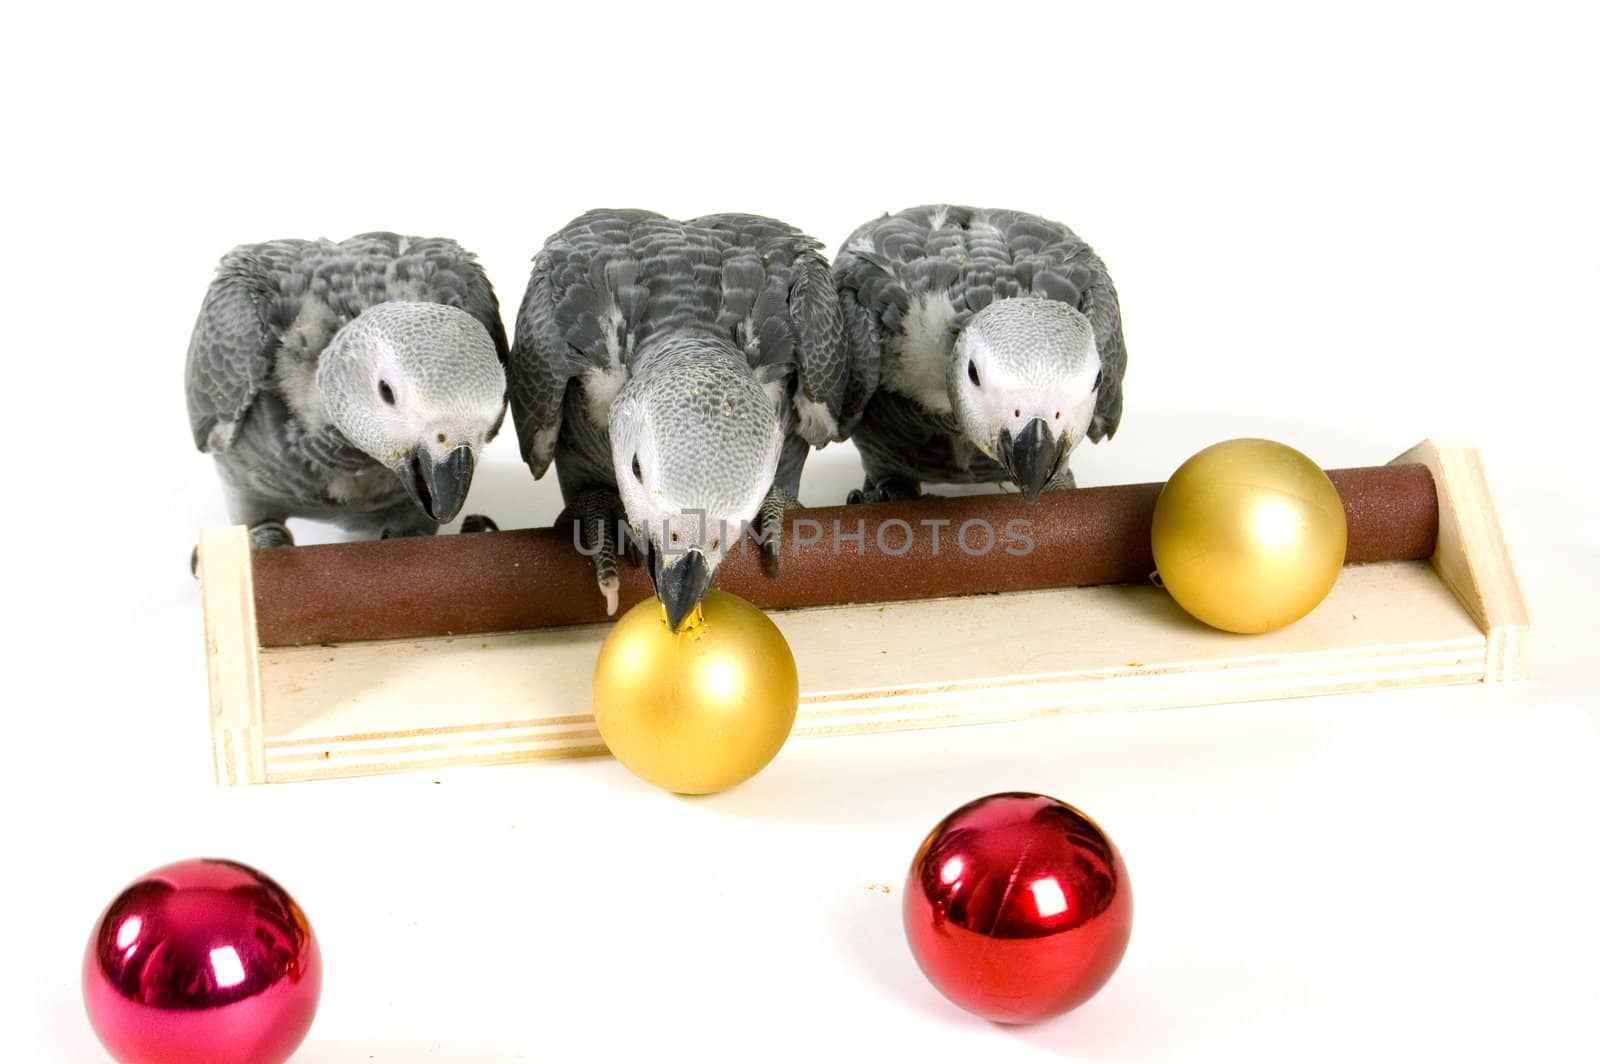 baby parrots on a stick playing with christmas balls